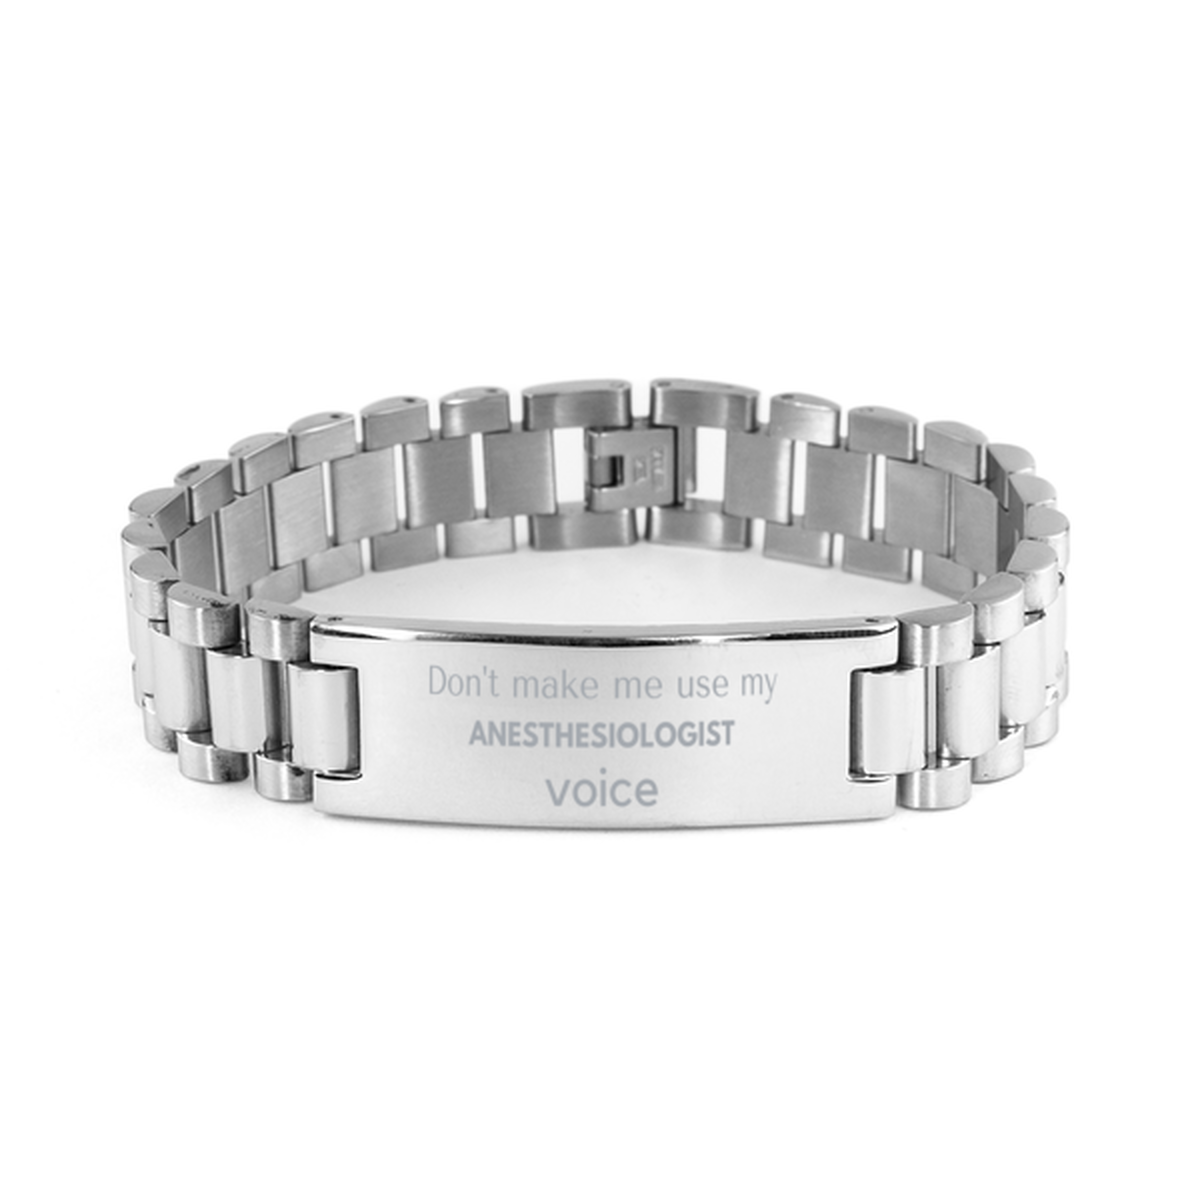 Don't make me use my Anesthesiologist voice, Sarcasm Anesthesiologist Gifts, Christmas Anesthesiologist Ladder Stainless Steel Bracelet Birthday Unique Gifts For Anesthesiologist Coworkers, Men, Women, Colleague, Friends